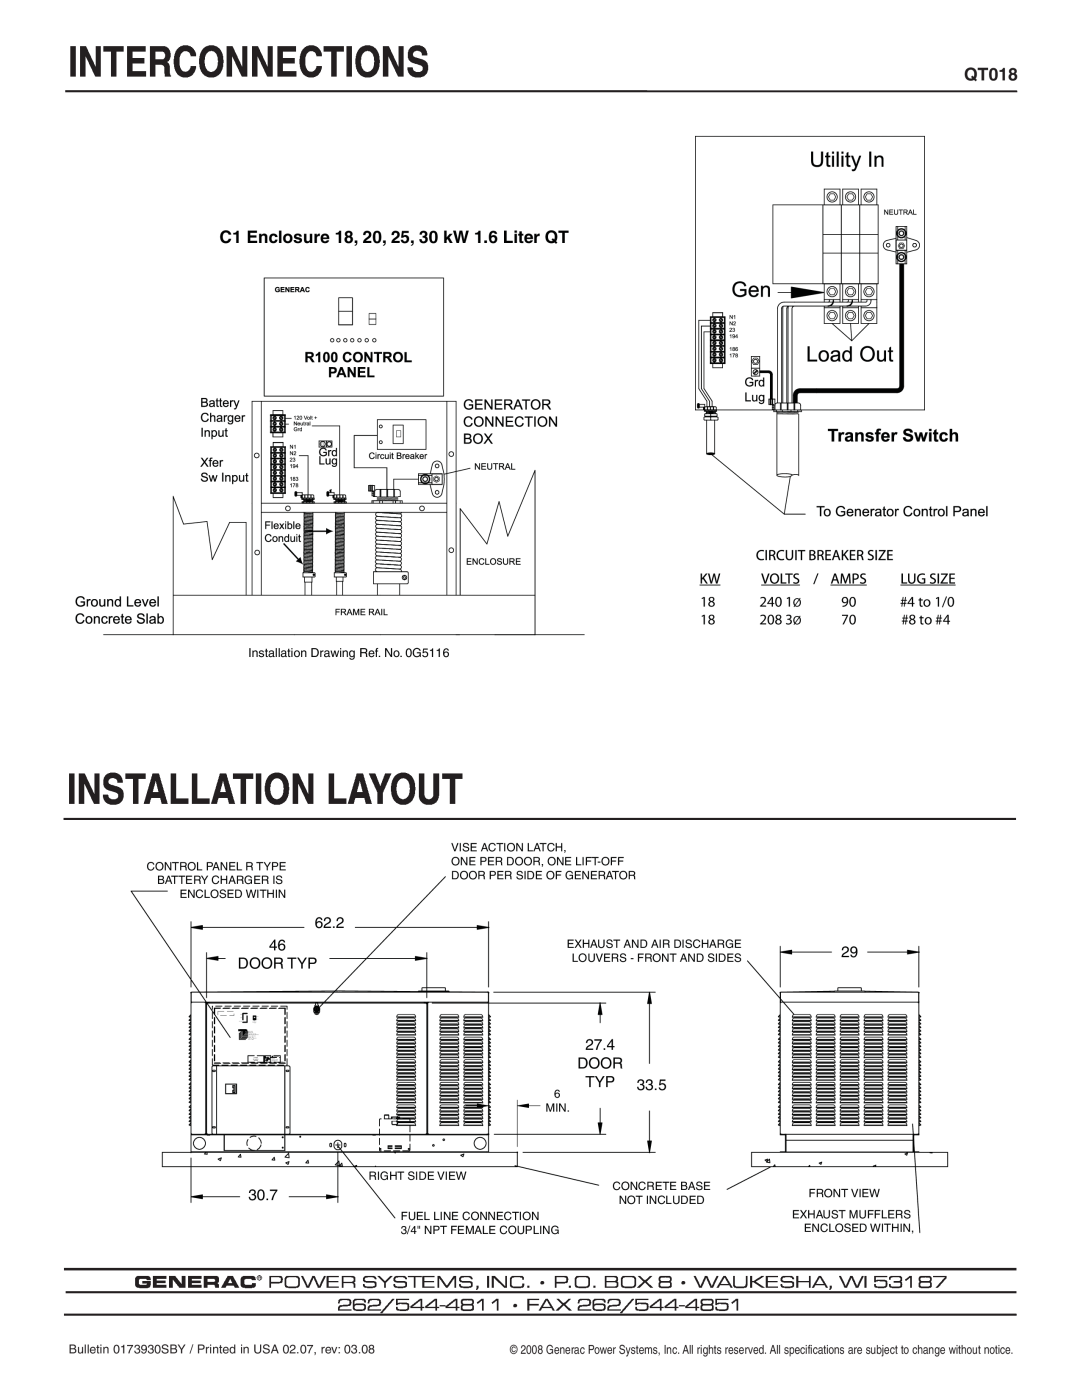 Generac Power Systems QT018 manual Interconnections, Installation Layout, C1 Enclosure 18, 20, 25, 30 kW 1.6 Liter QT 